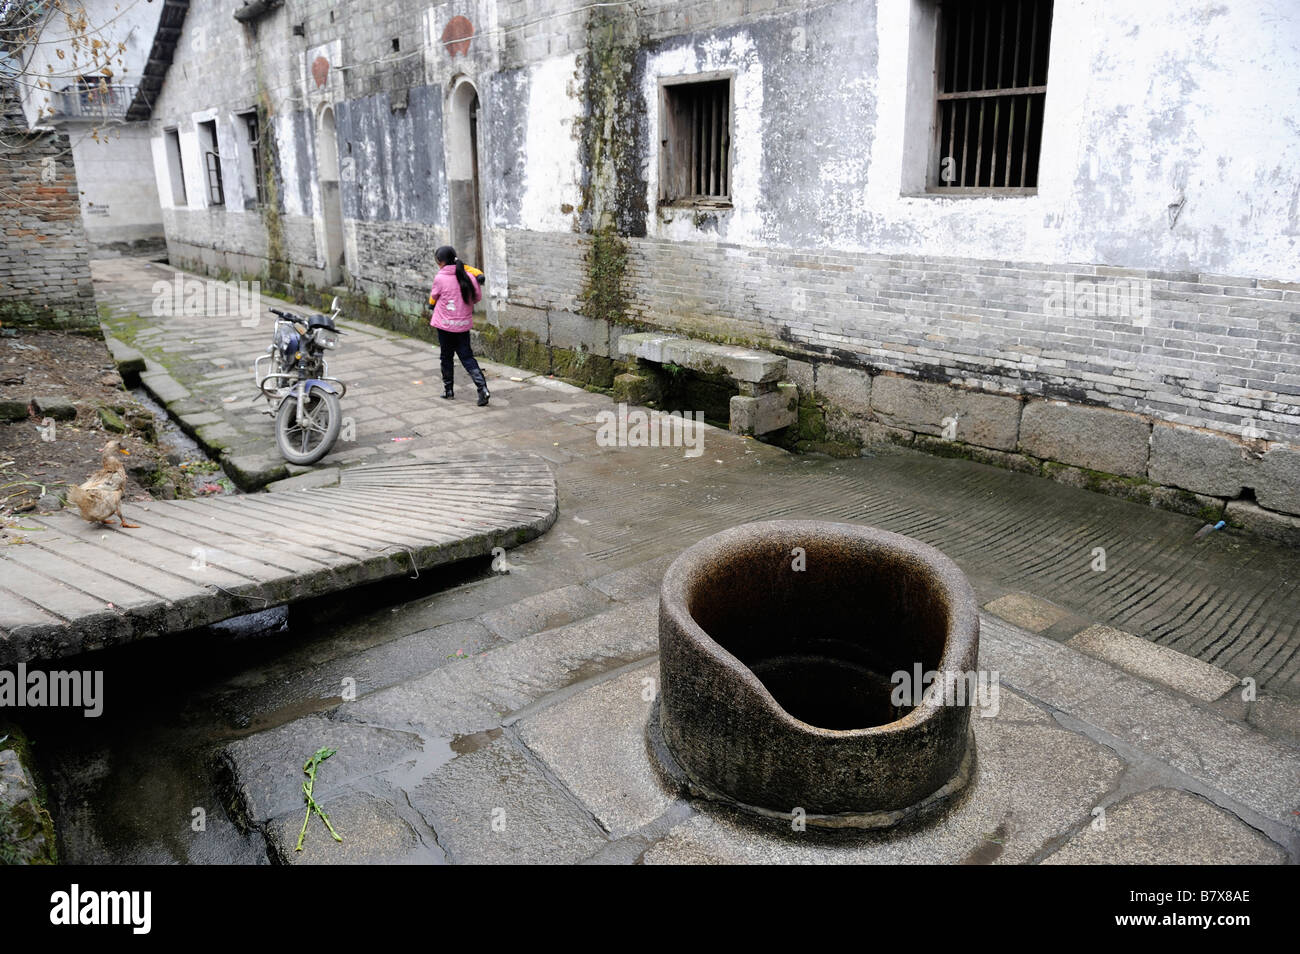 Ancient water well is still used in Tianbao village, Yifeng, Jiangxi, China. 02-Feb-2009 Stock Photo